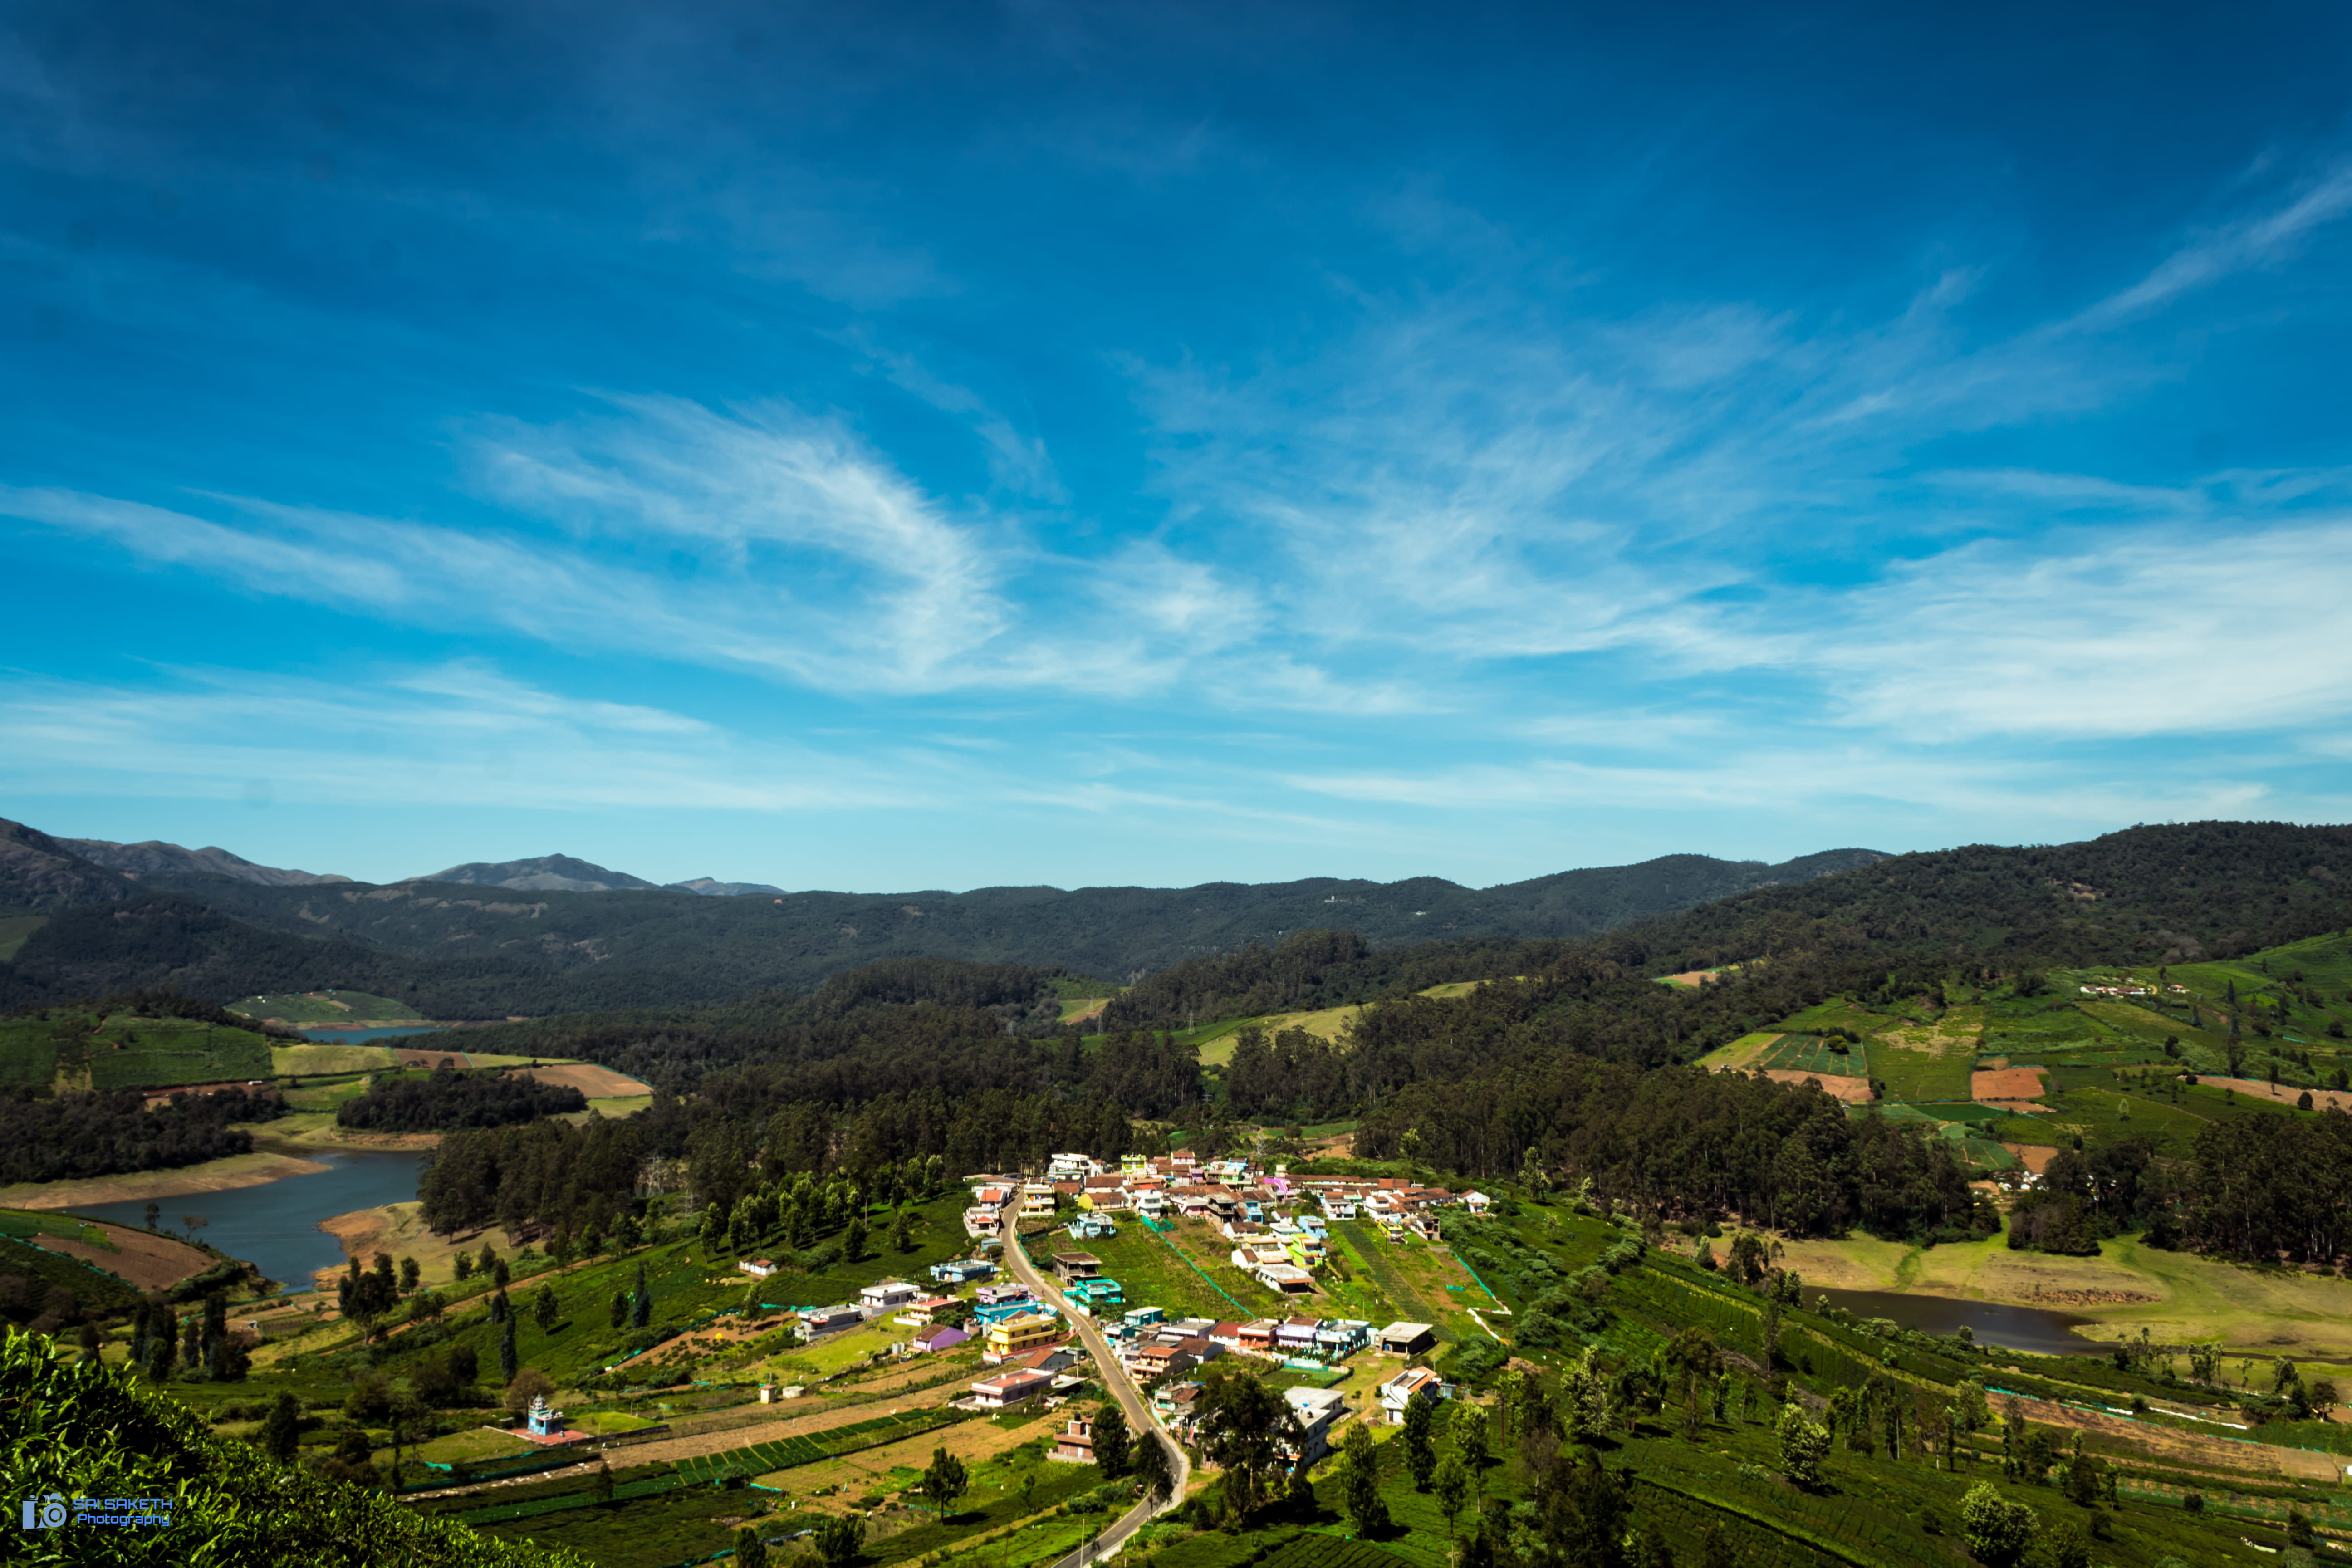 india, ooty, mountain, sky, scenics - nature, beauty in nature